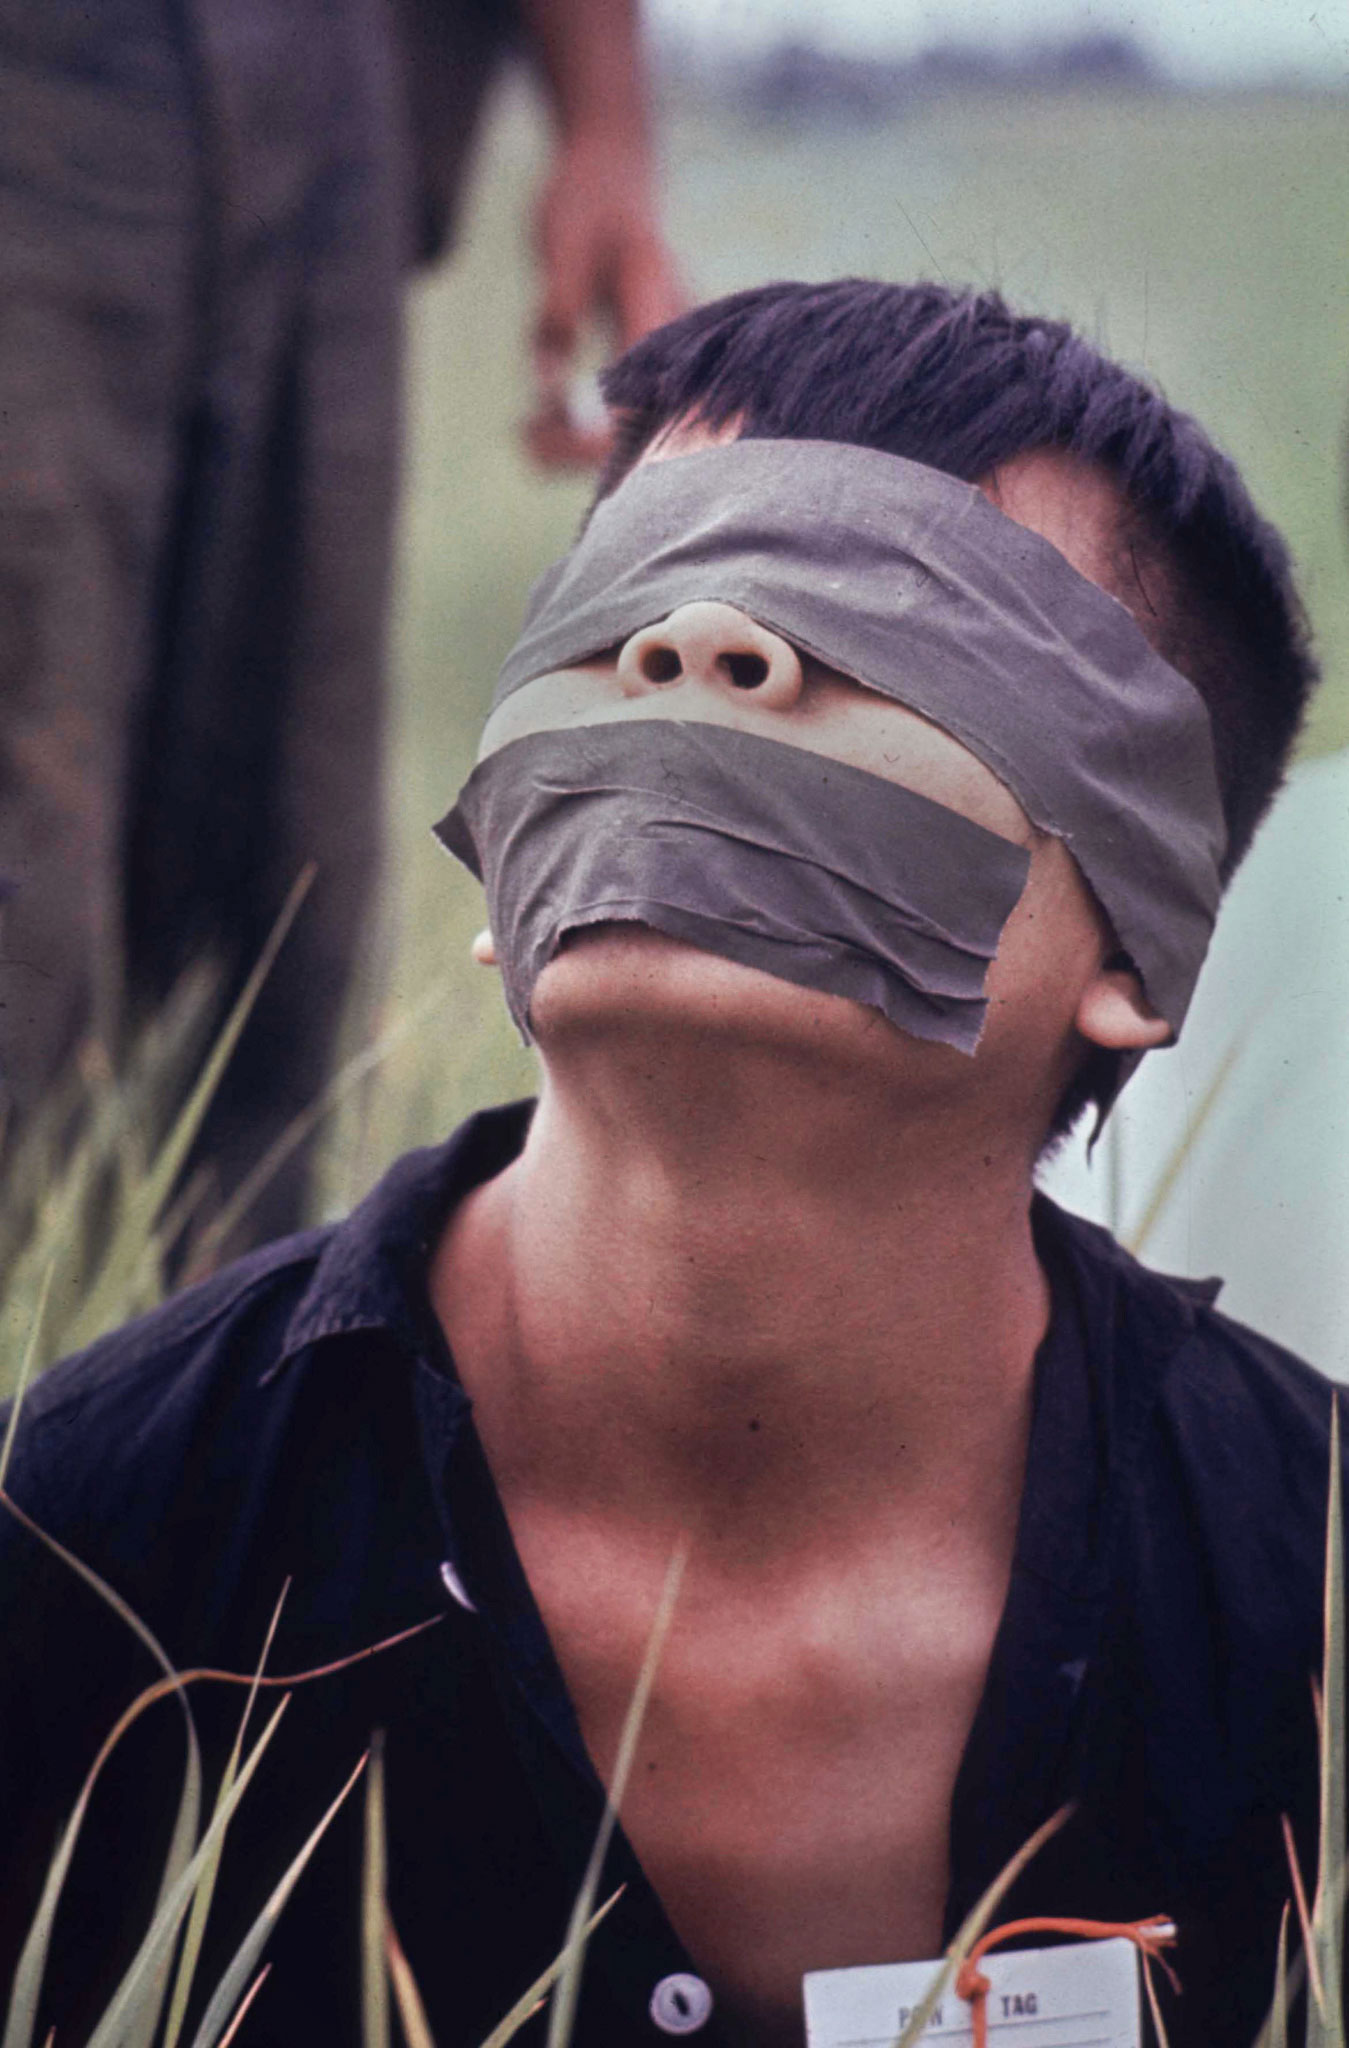 The eyes and mouth of a Vietcong prisoner are taped by U.S. Marines. This picture ran on the cover of Life's Nov. 26, 1965 issue with the cover line, "The Blunt Reality of War."